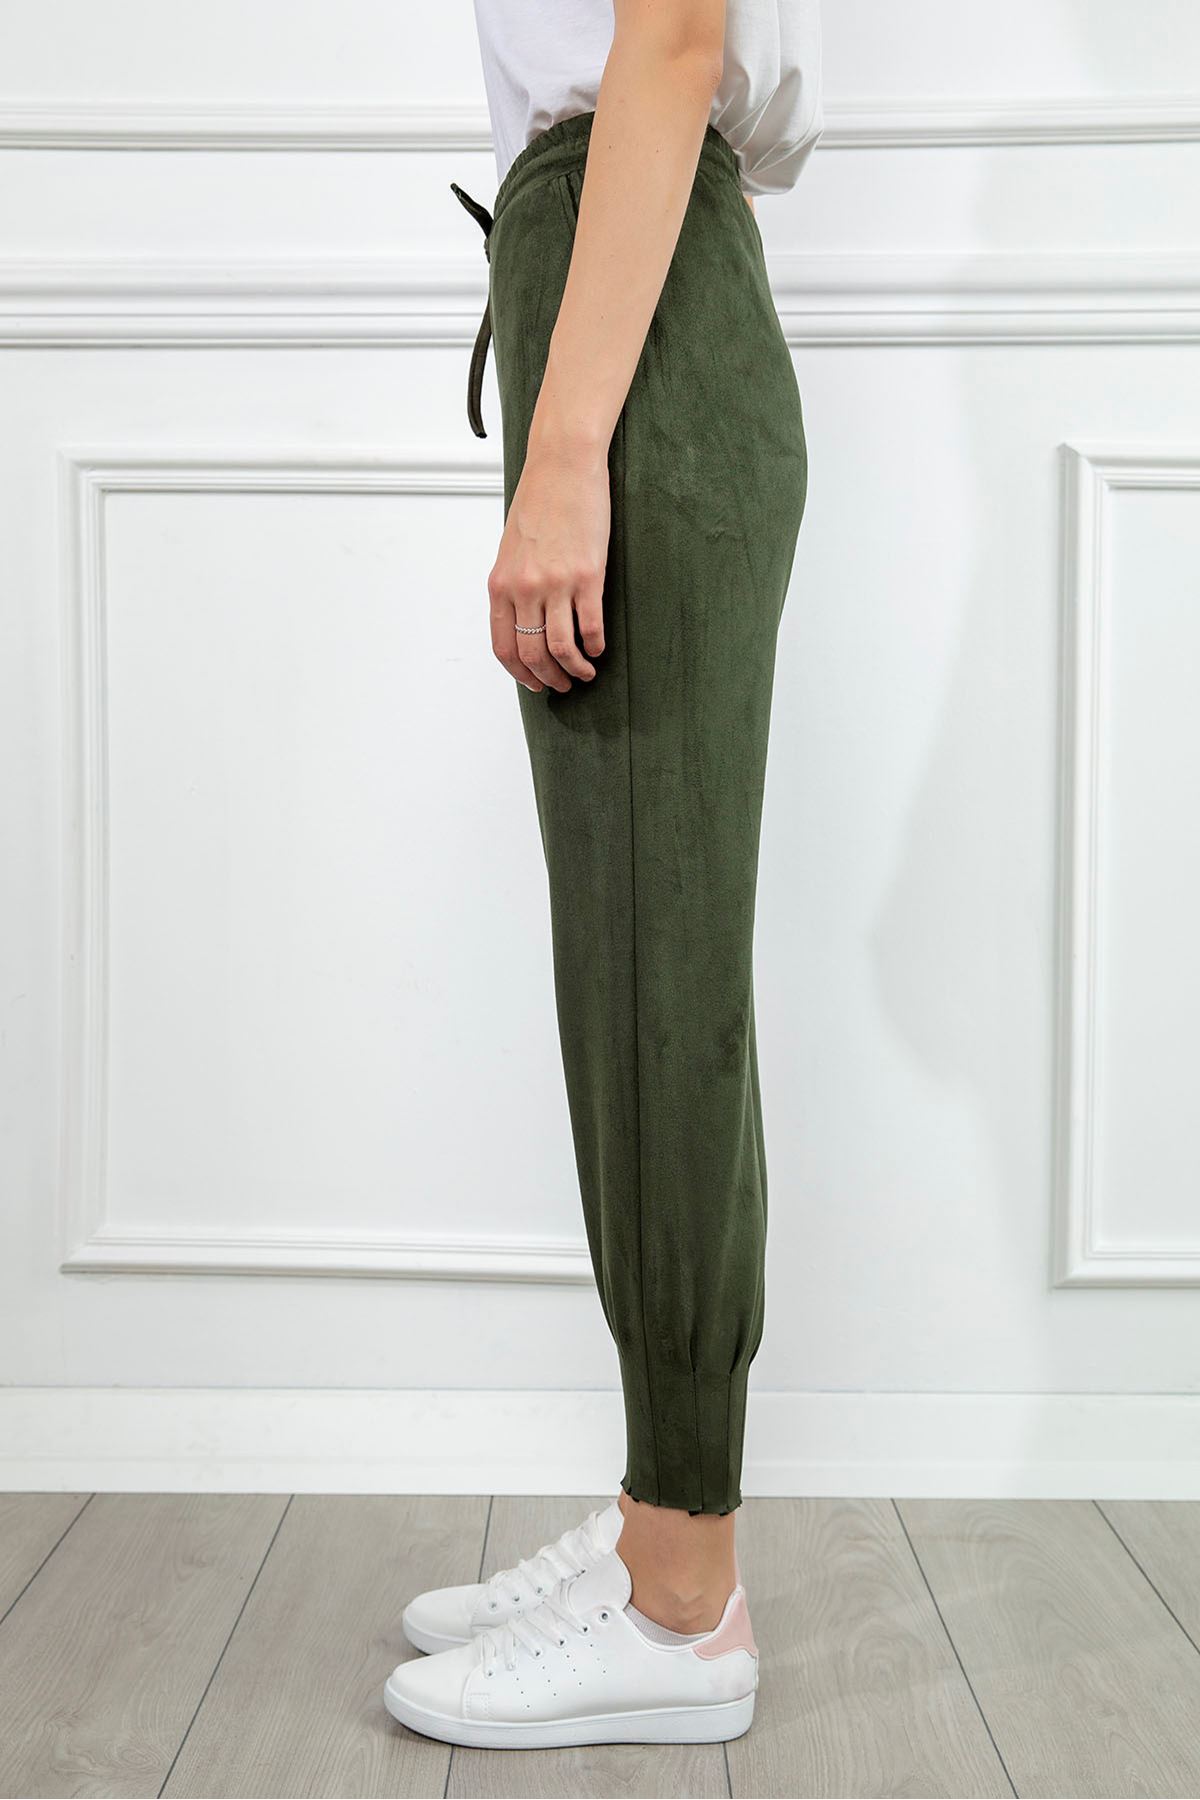 Suede Fabric Tight Fit Slited Women'S Trouser - Khaki 